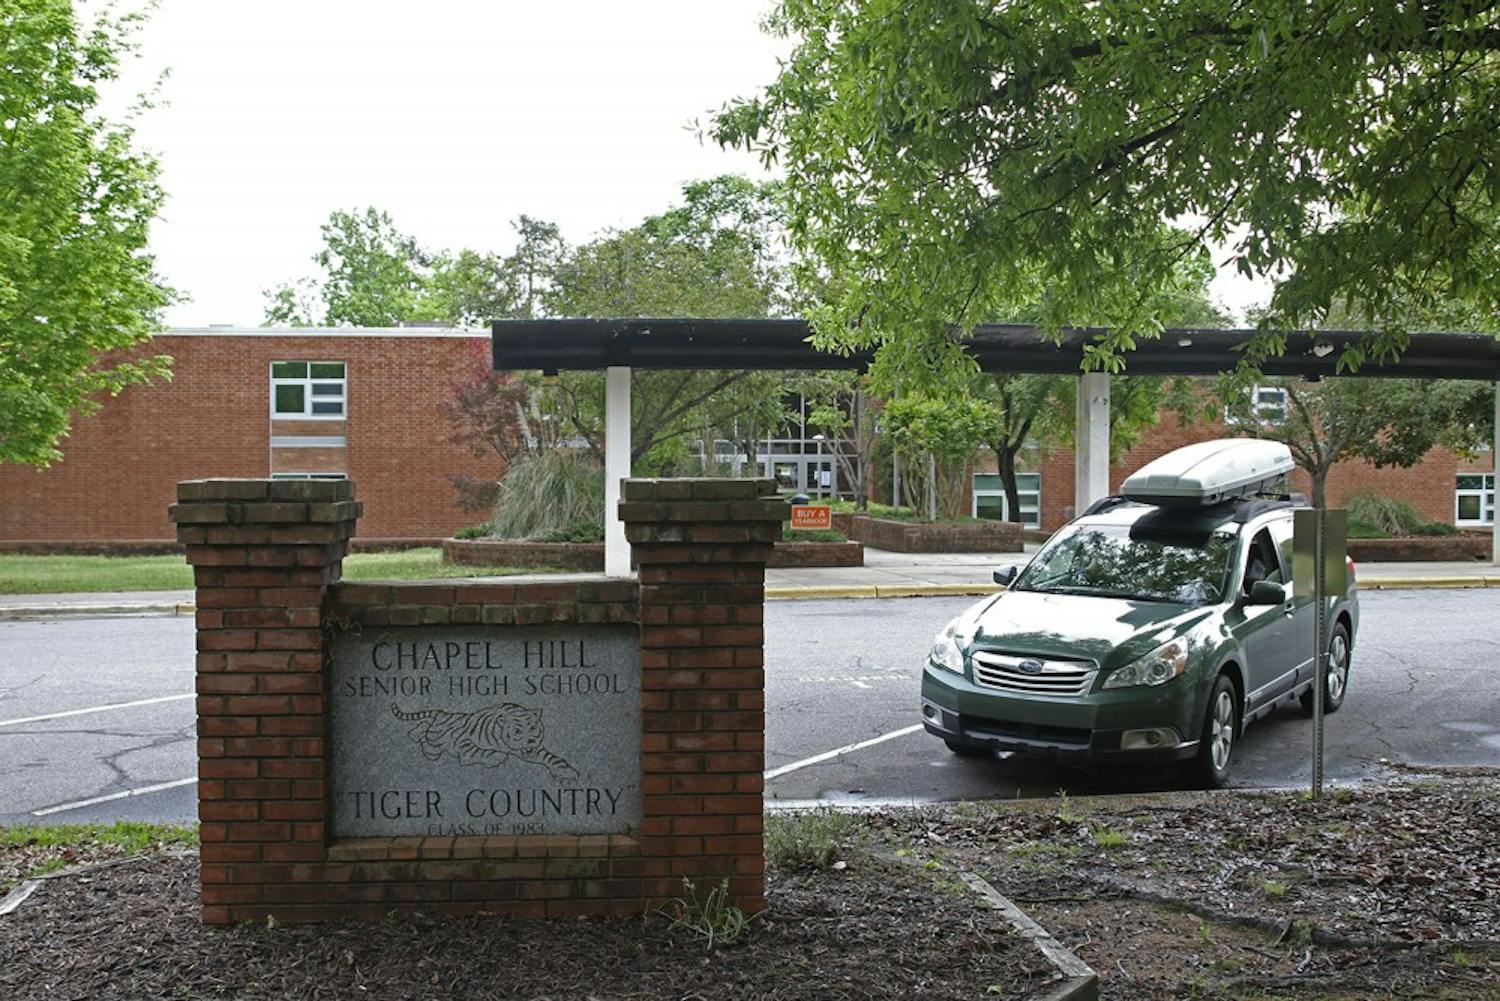 Chapel Hill High School’s proposed plans to remodel include two entirely new academic school buildings.